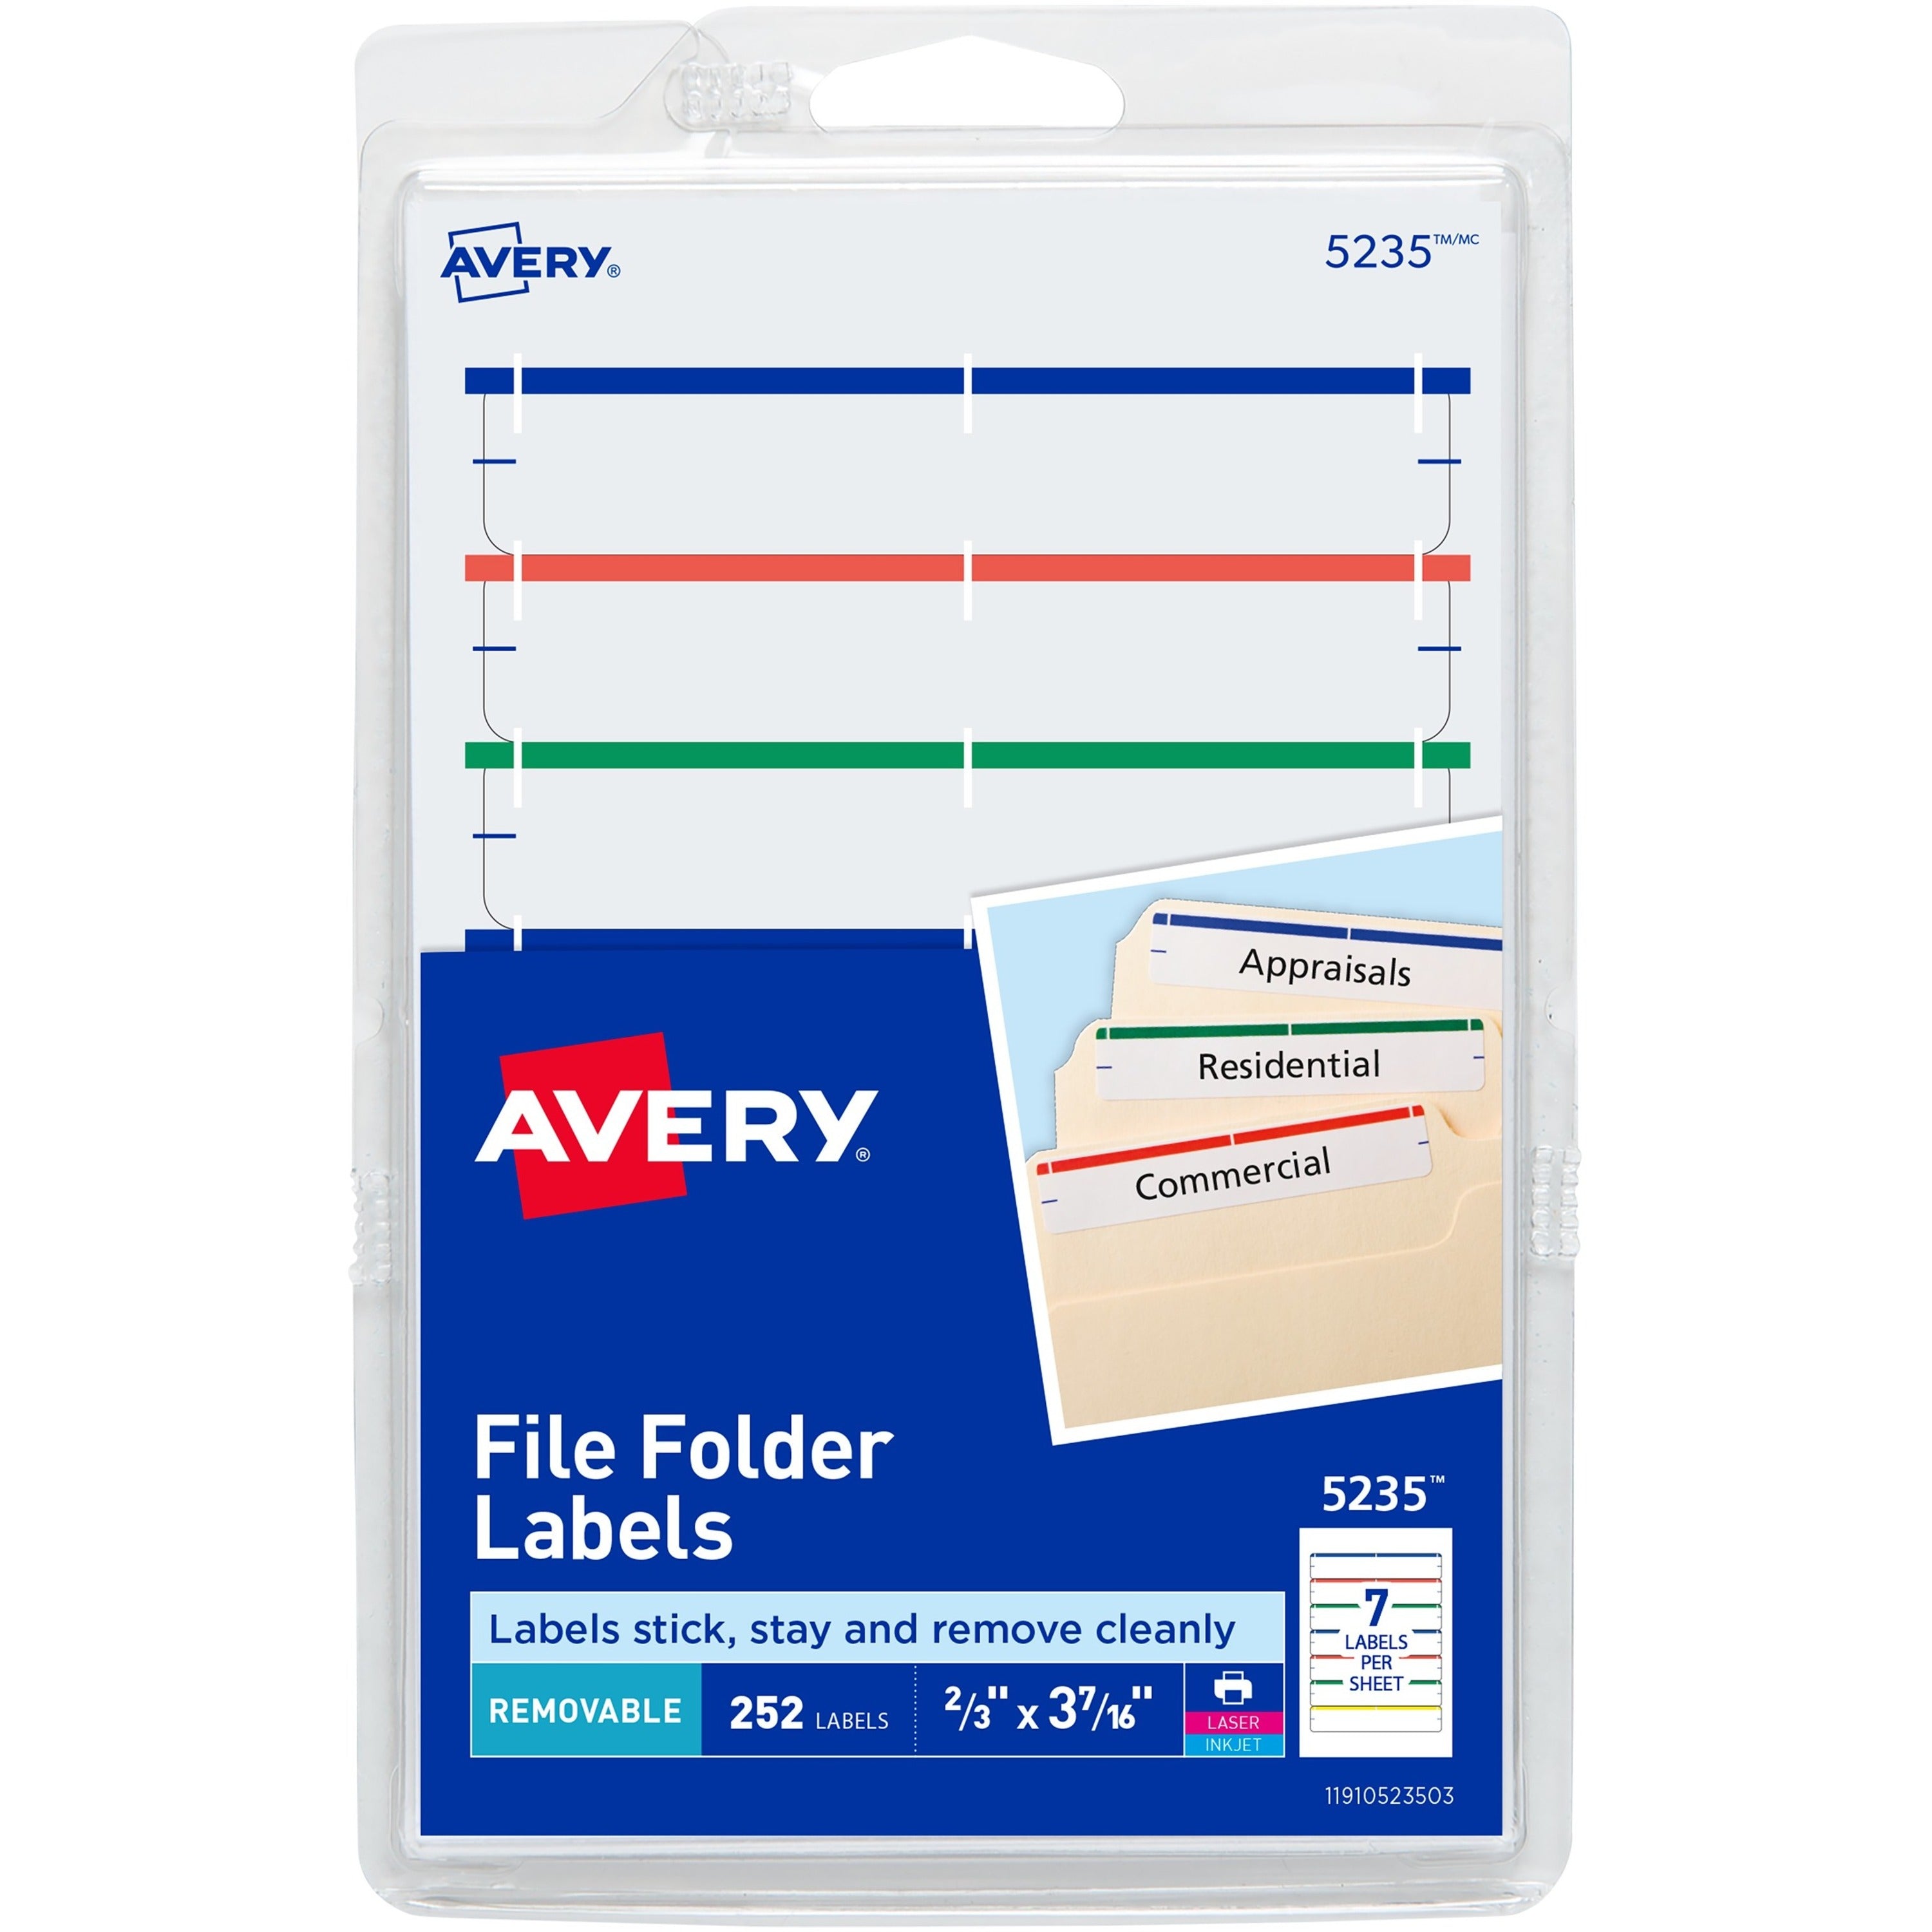 avery-removable-file-folder-labels-2-3-width-x-3-7-16-length-removable-adhesive-rectangle-laser-inkjet-assorted-dark-blue-dark-red-green-yellow-paper-7-sheet-648-total-sheets-4536-total-labels-18-carton_ave05235 - 1